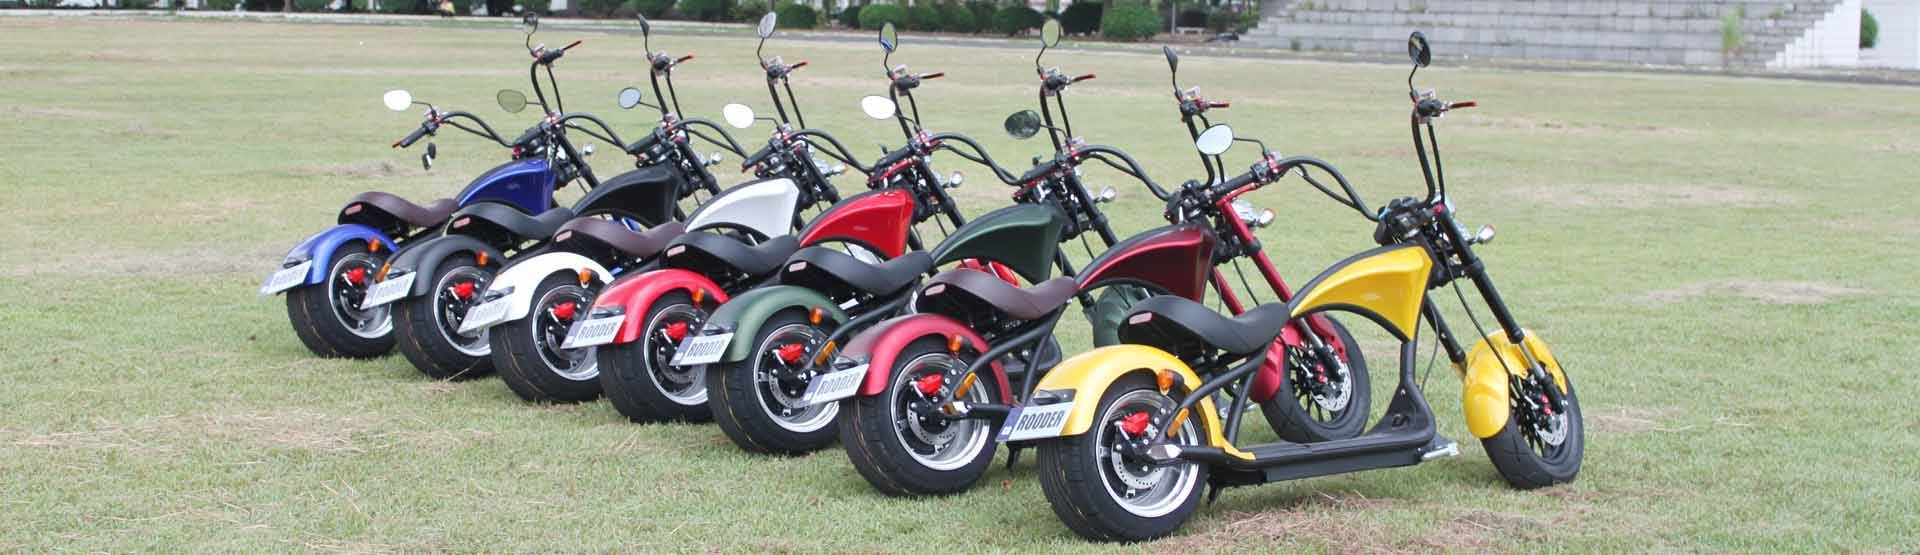 Rooder süper m1 citycoco scooter